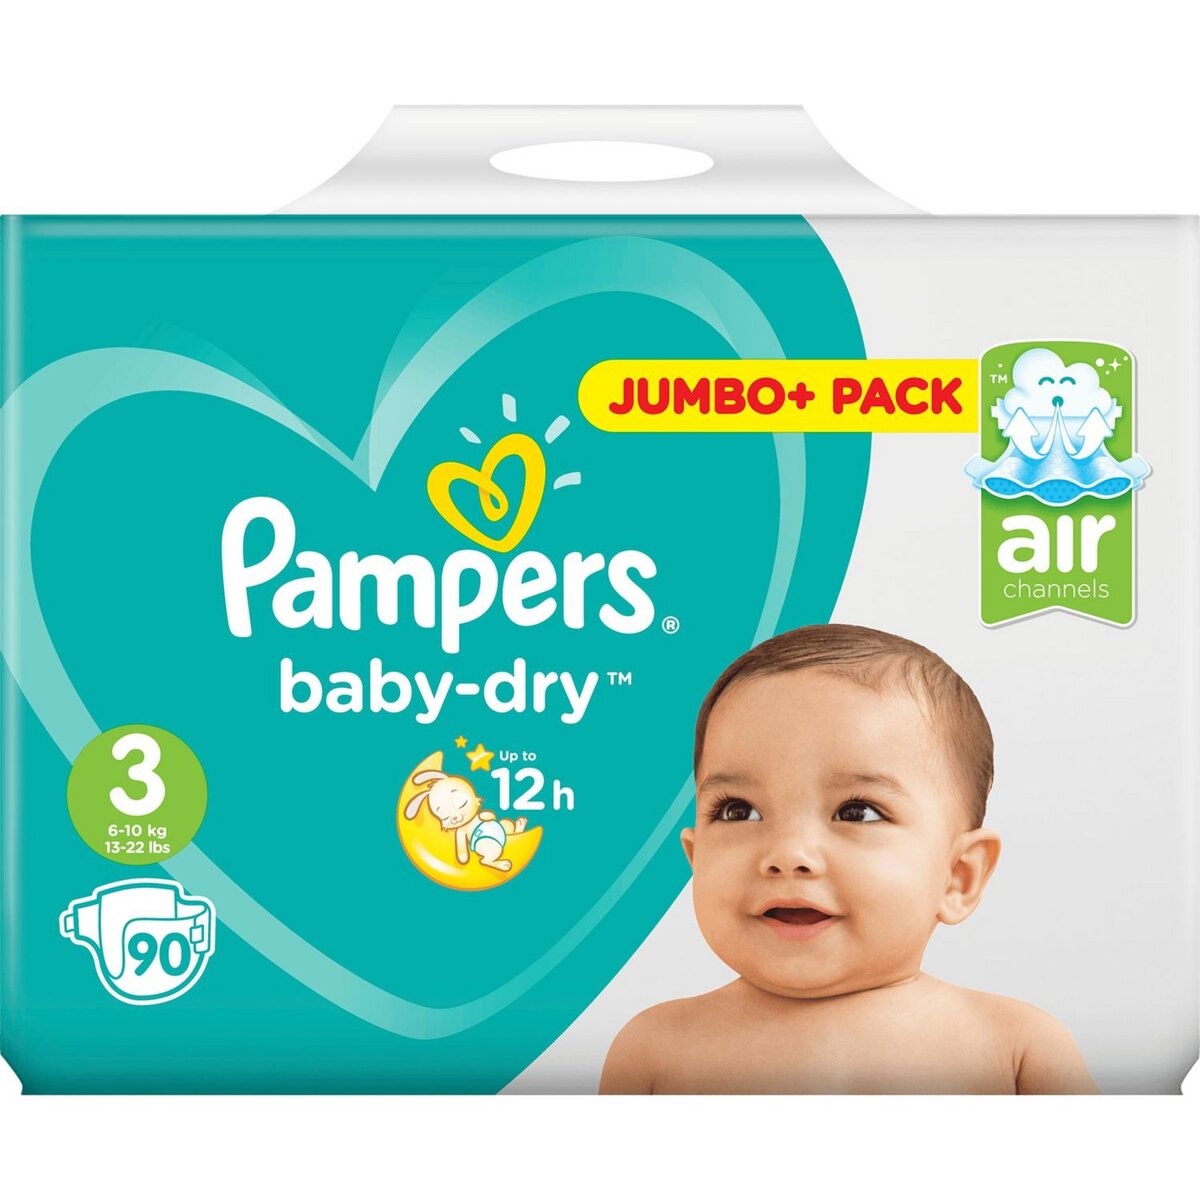 PAMPERS Baby-dry couche taille 4 ( 9-14kg ) 90 couches pas cher